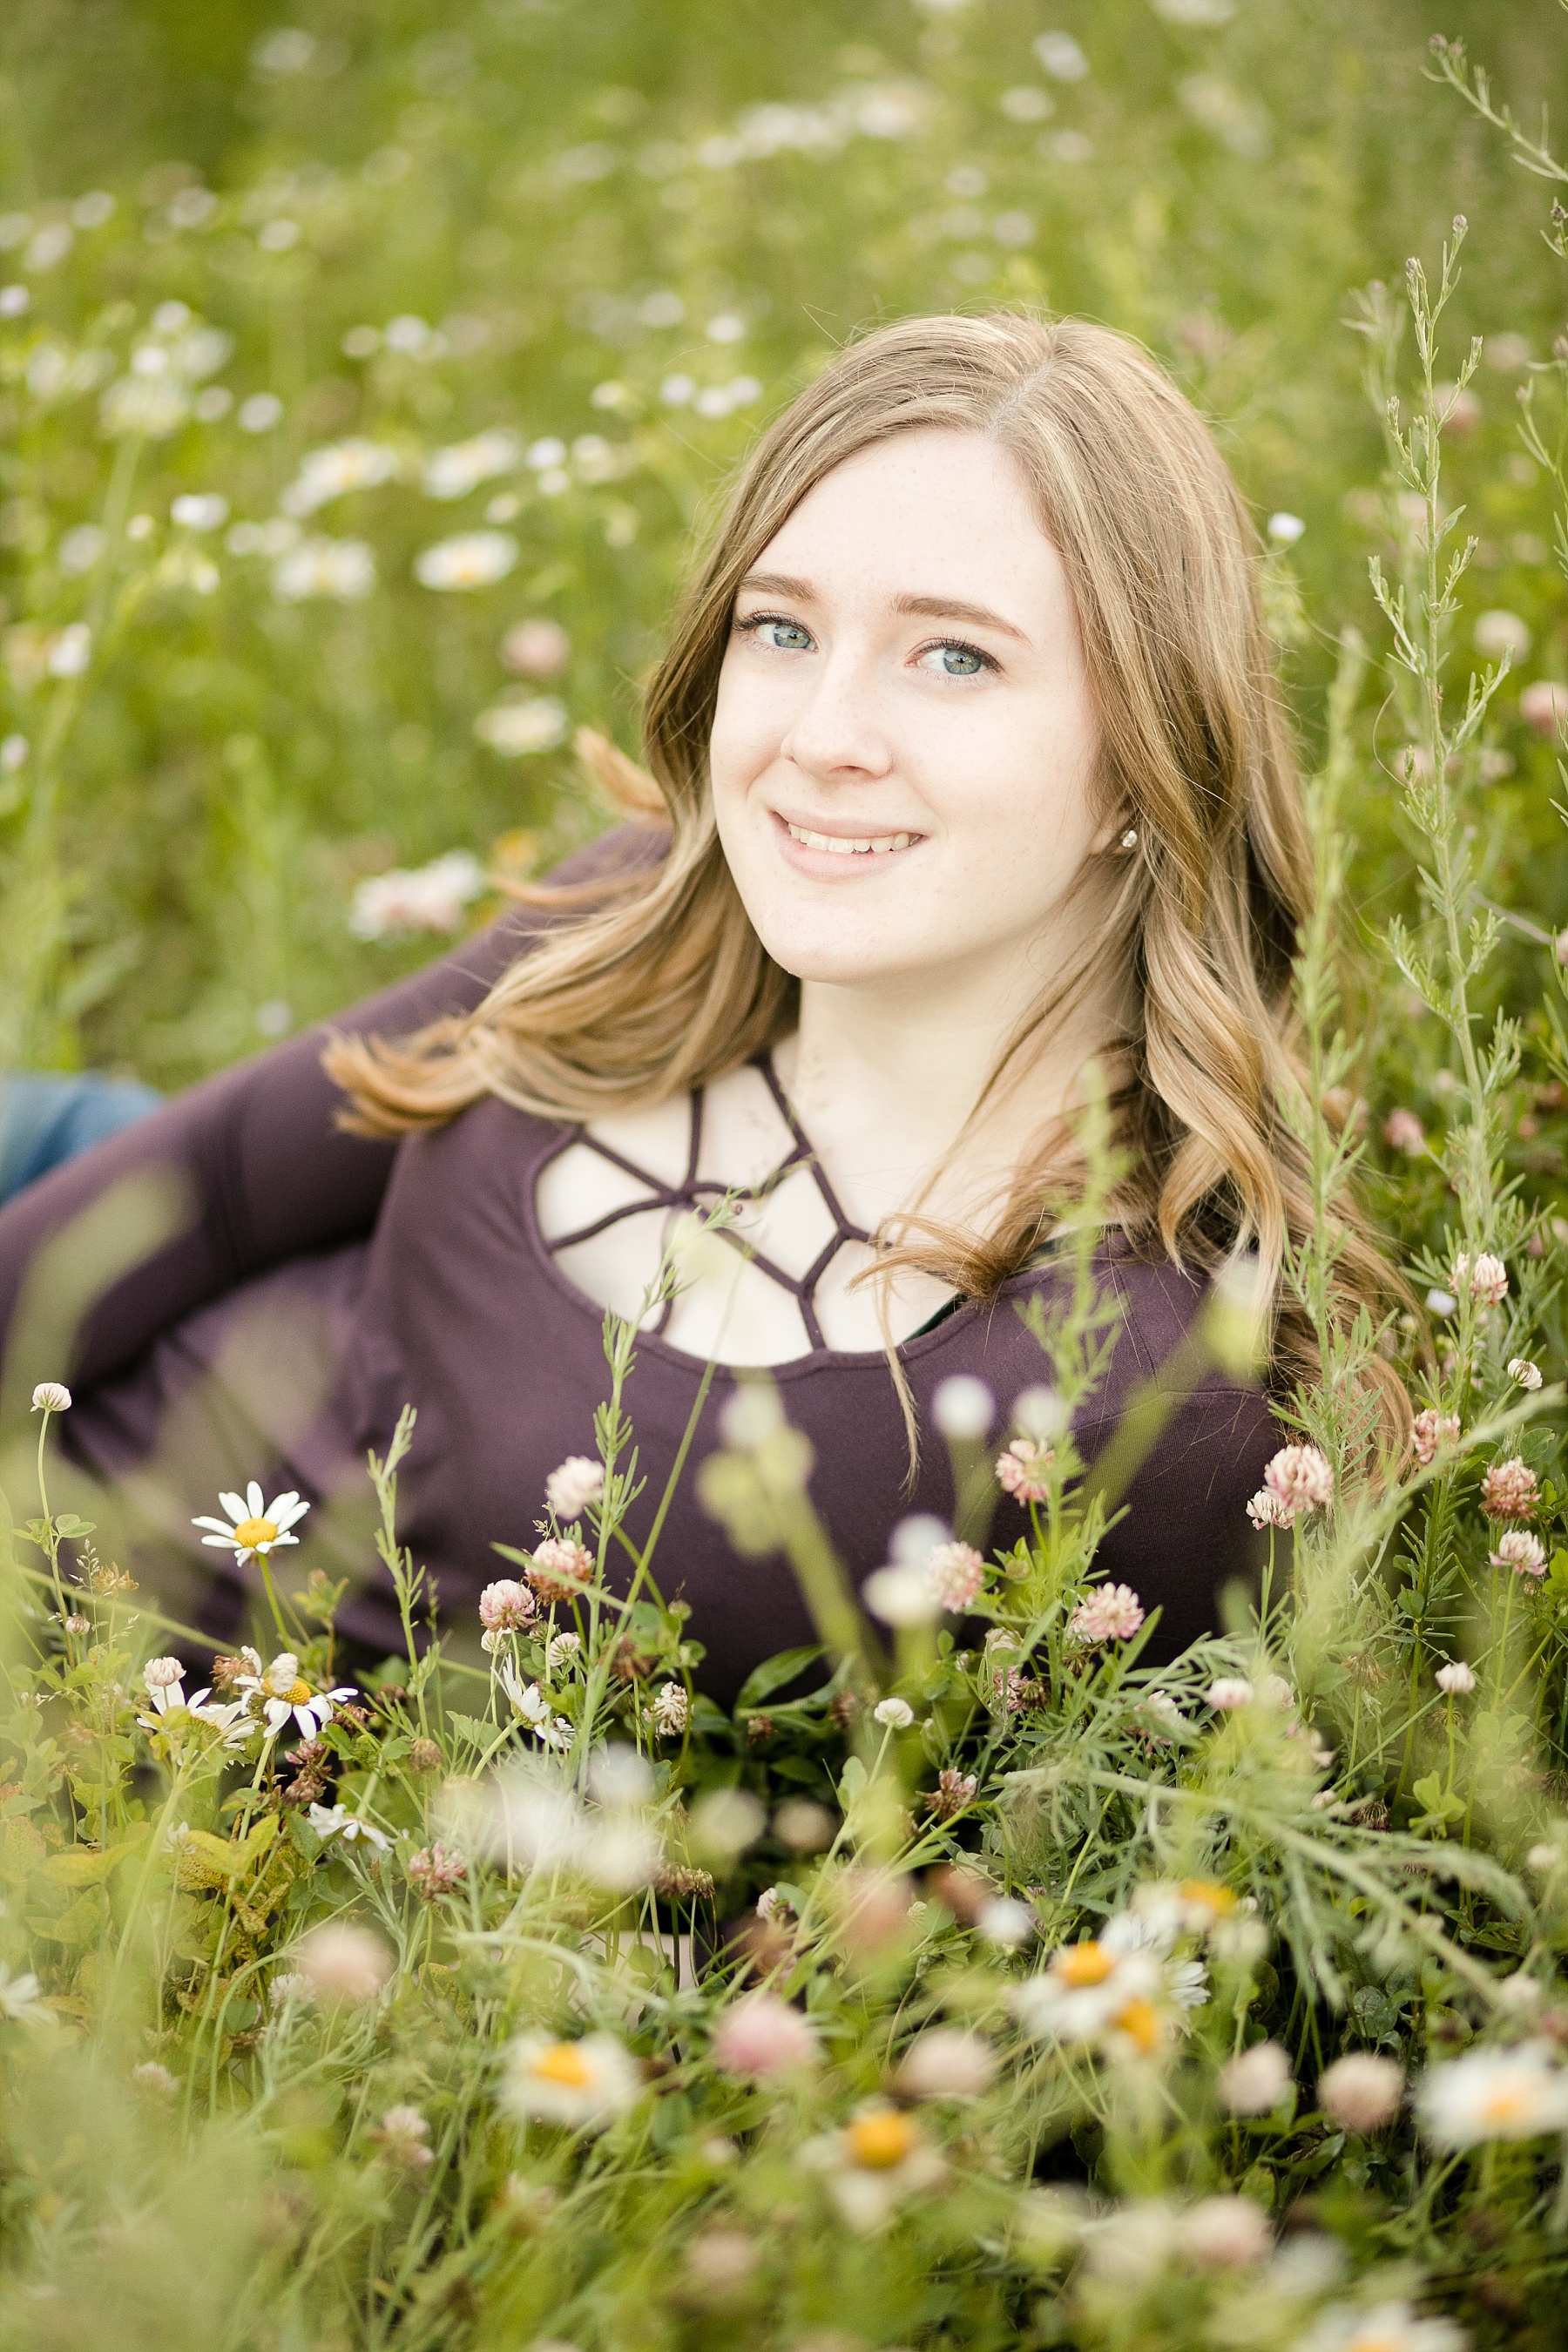 Miranda wanted rustic midwest summer senior photos and we had just that.  The midsummer evening light was perfection in a field of daisies!